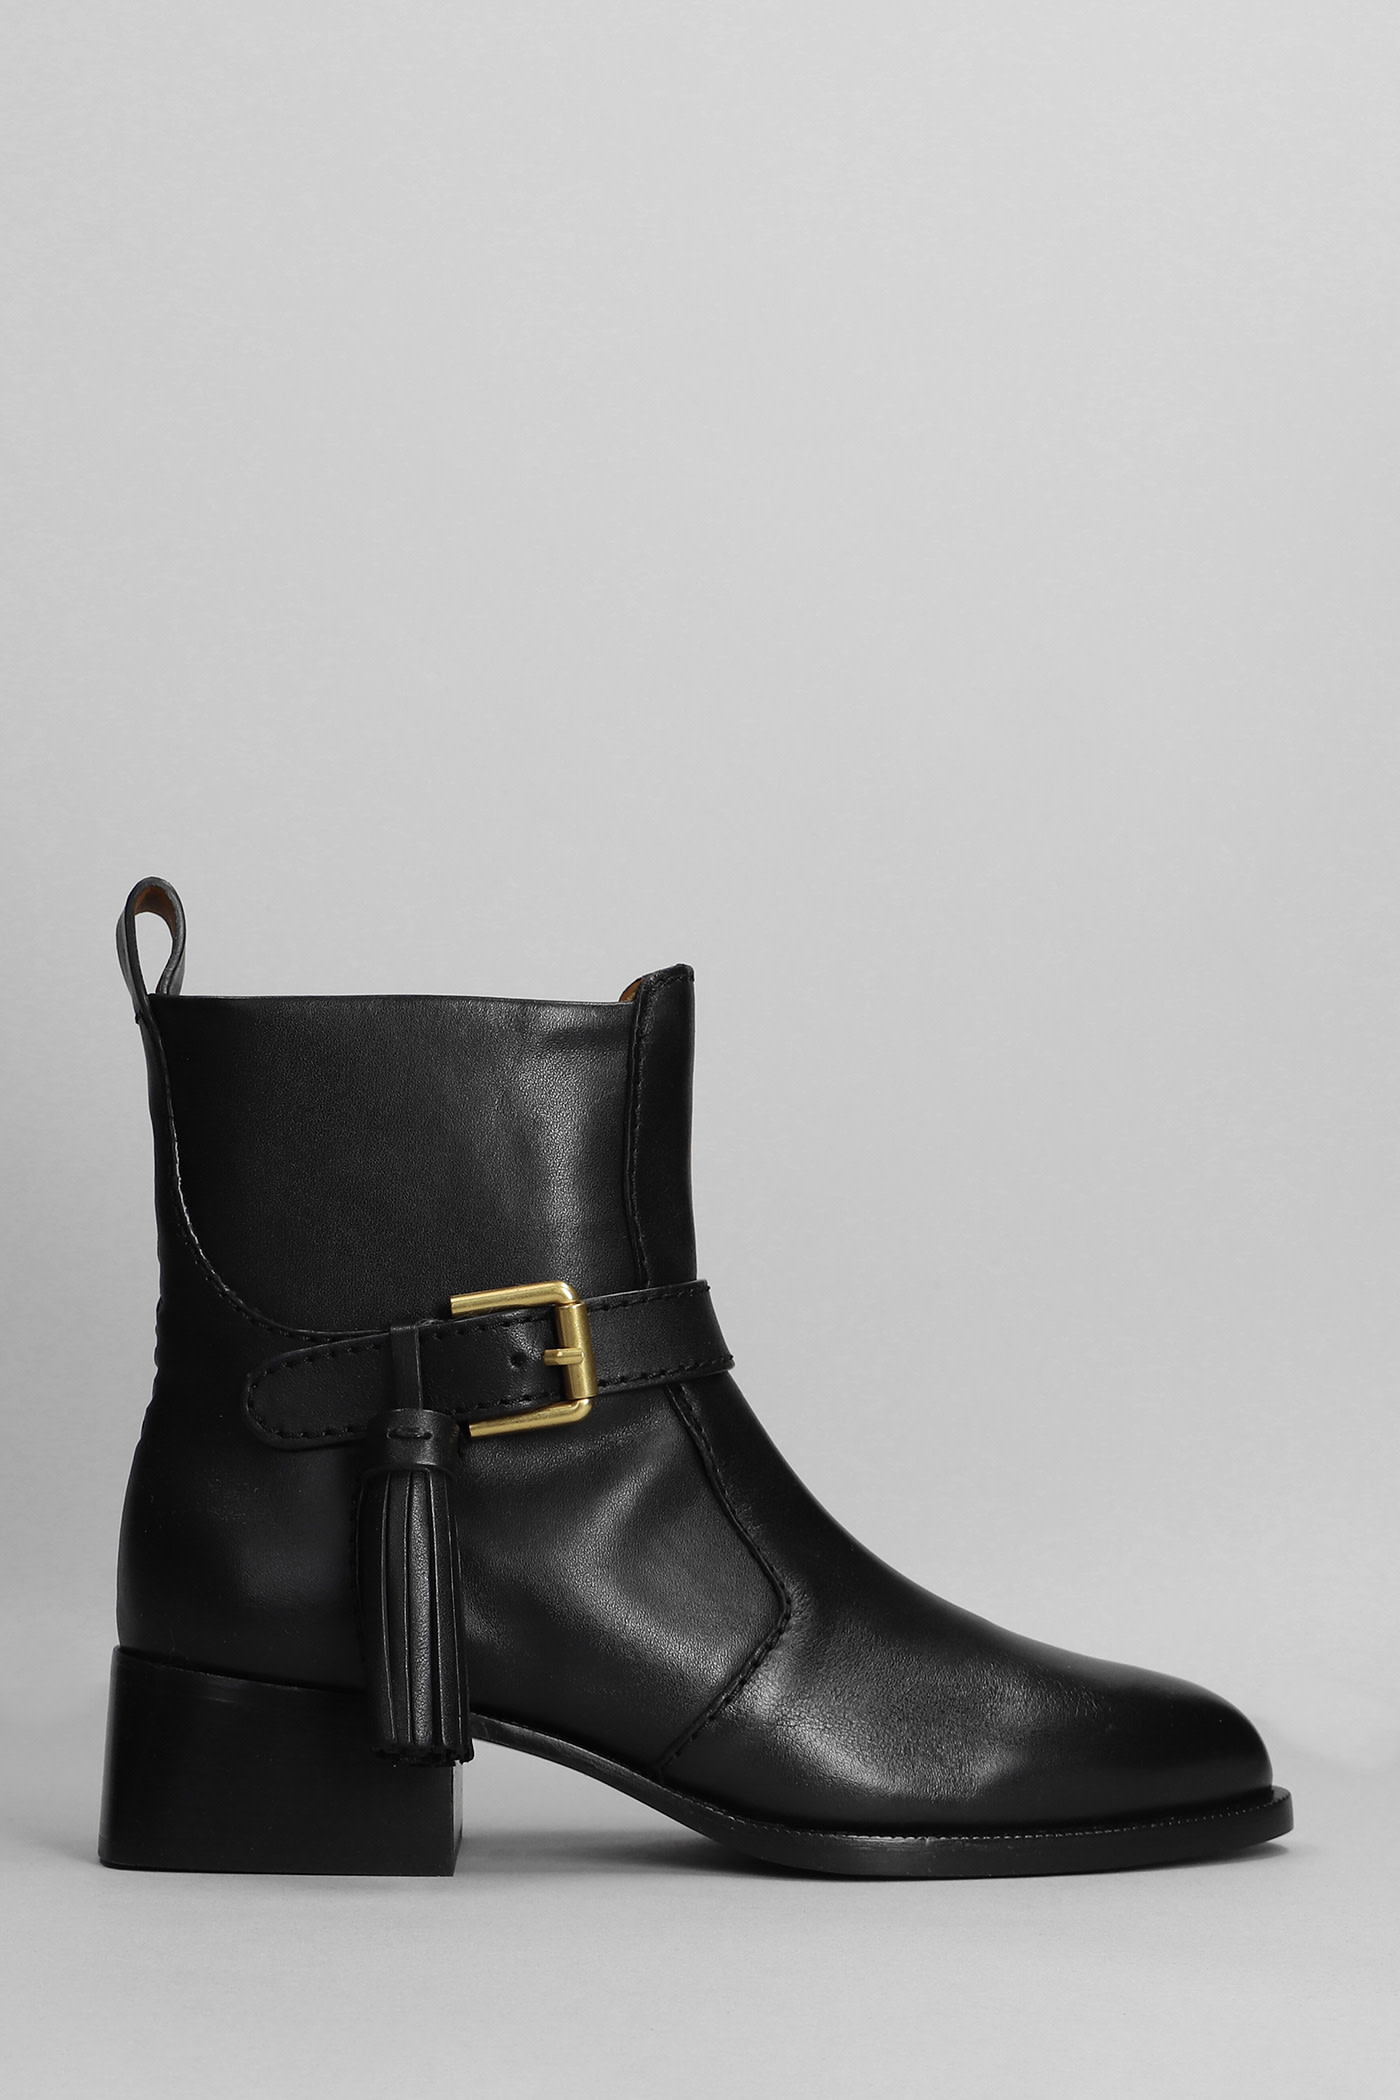 See by Chloé Lory High Heels Ankle Boots In Black Leather